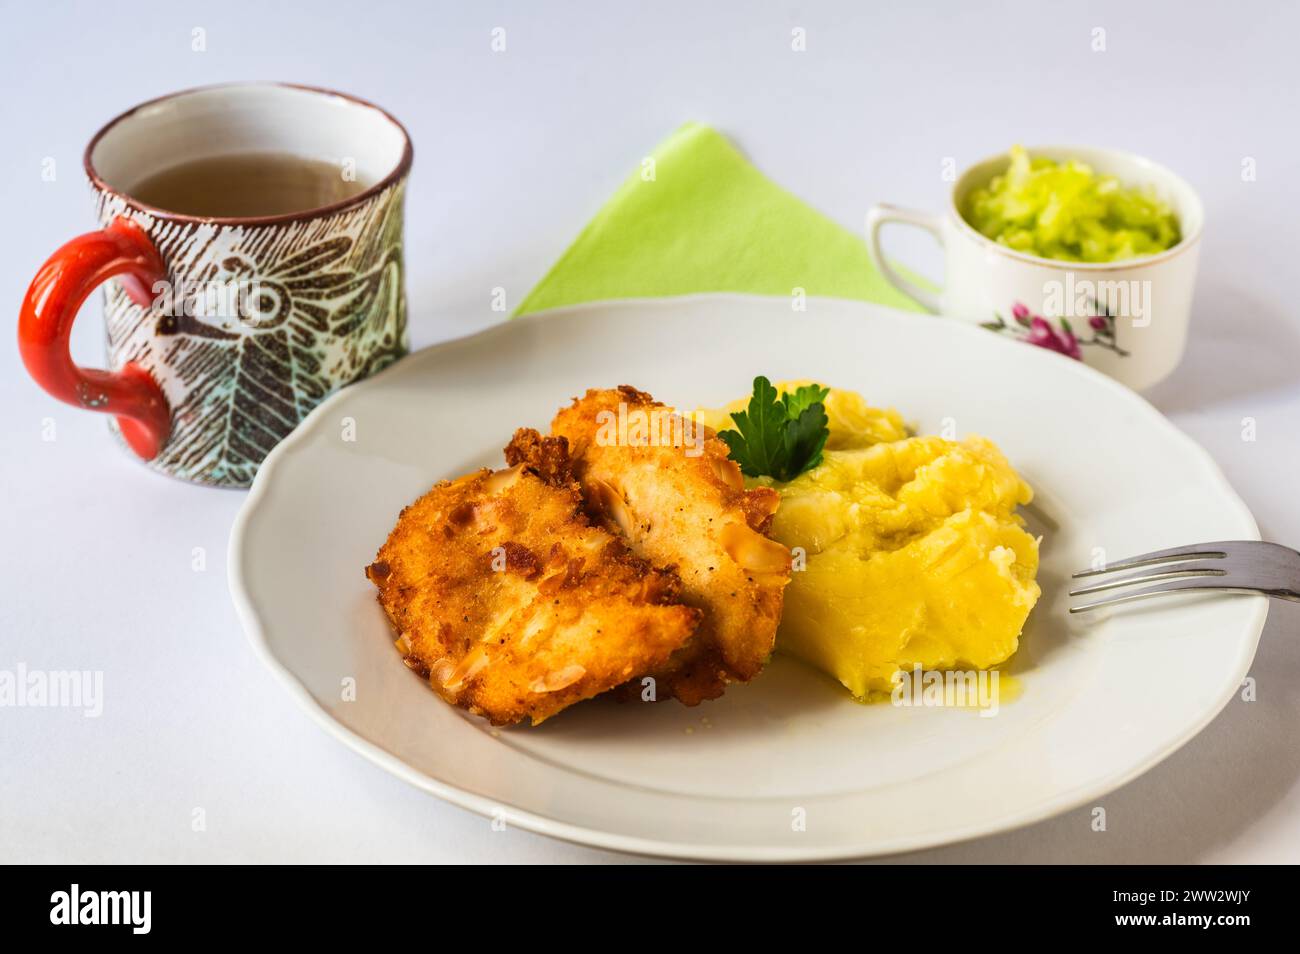 Fried schnitzel in breadcrumb with almonds, mashed potato on white plate, green towel,decorative cup with lemonade,cucumber salad. Stock Photo